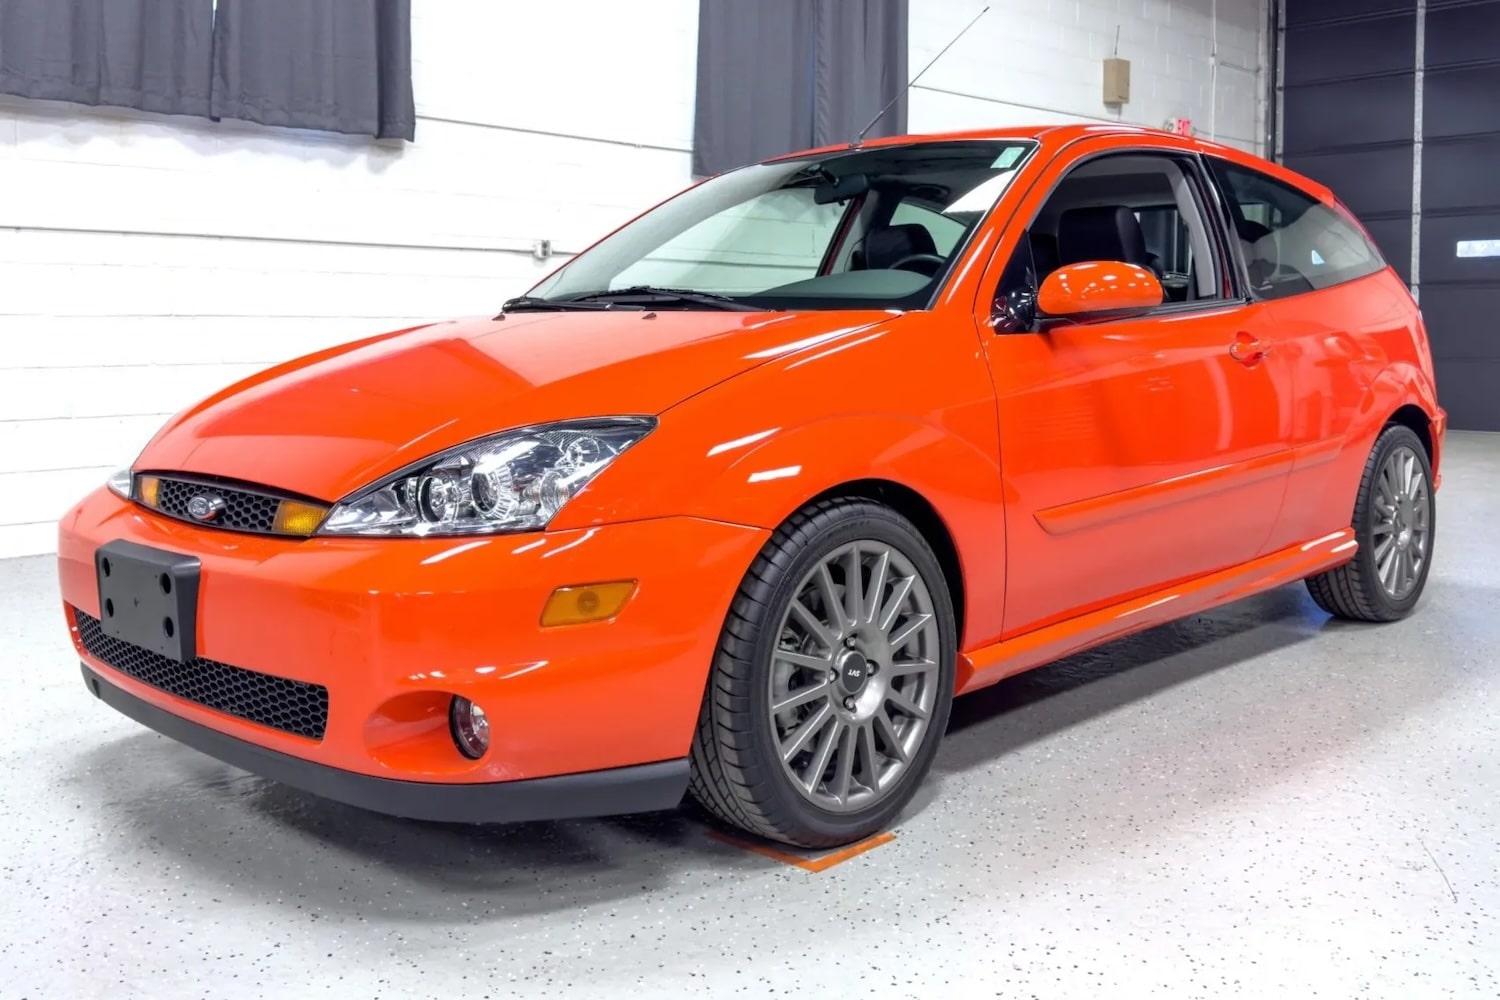 2003 Ford Focus ZX3 SVT With 345 Miles Up For Auction